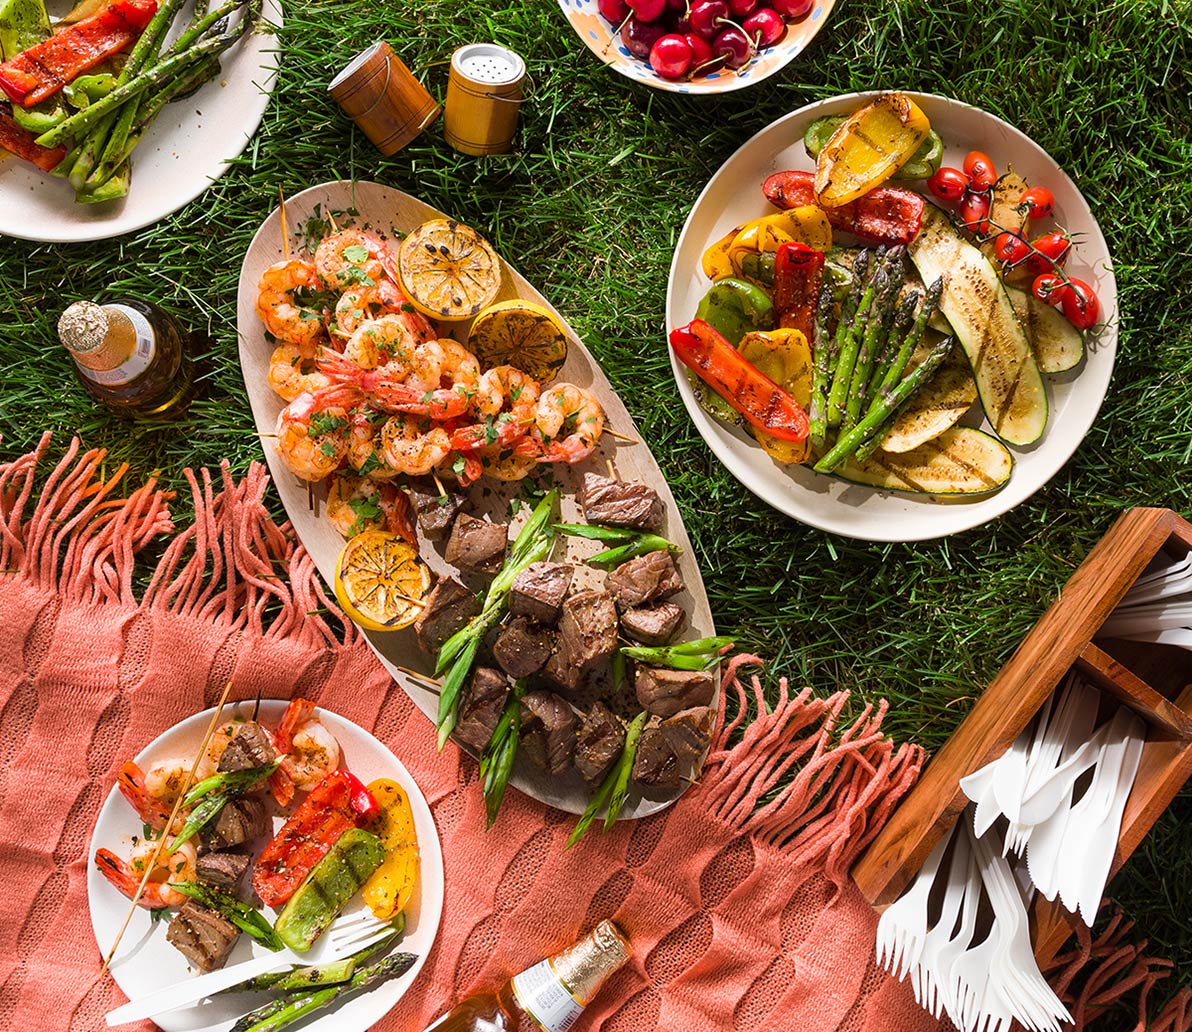 Plates of grilled vegetables, meat, and seafood laid out on the grass